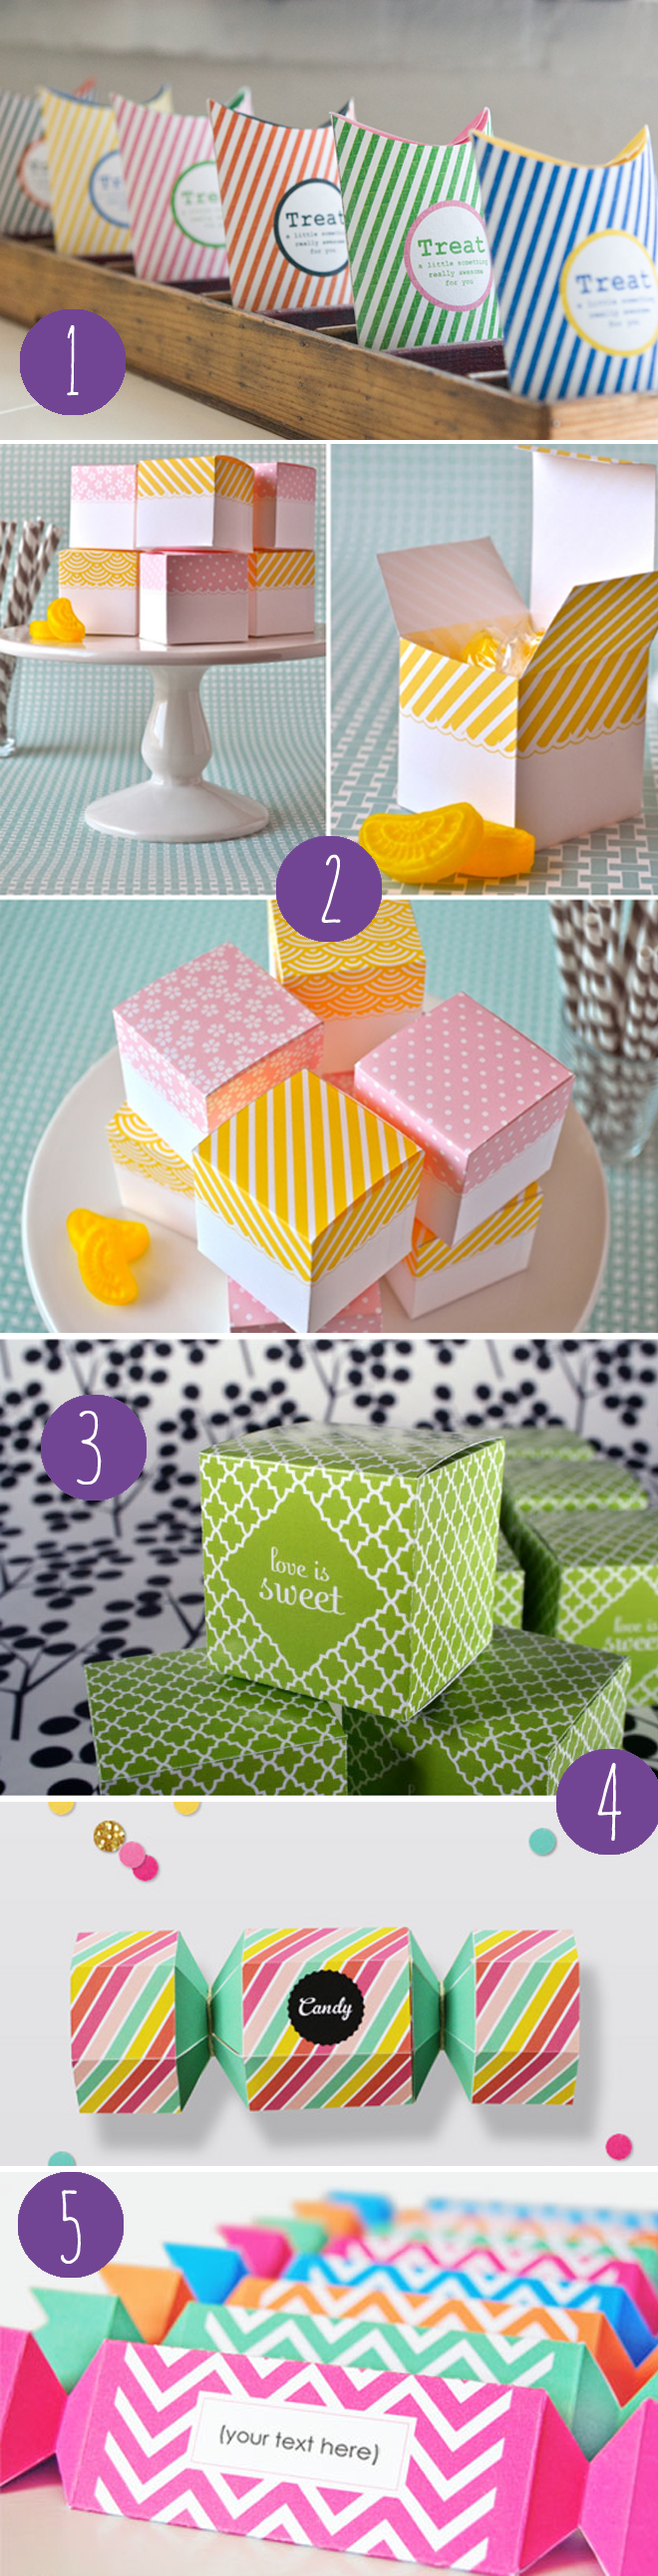 free printable favor boxes for Valentines Day candy